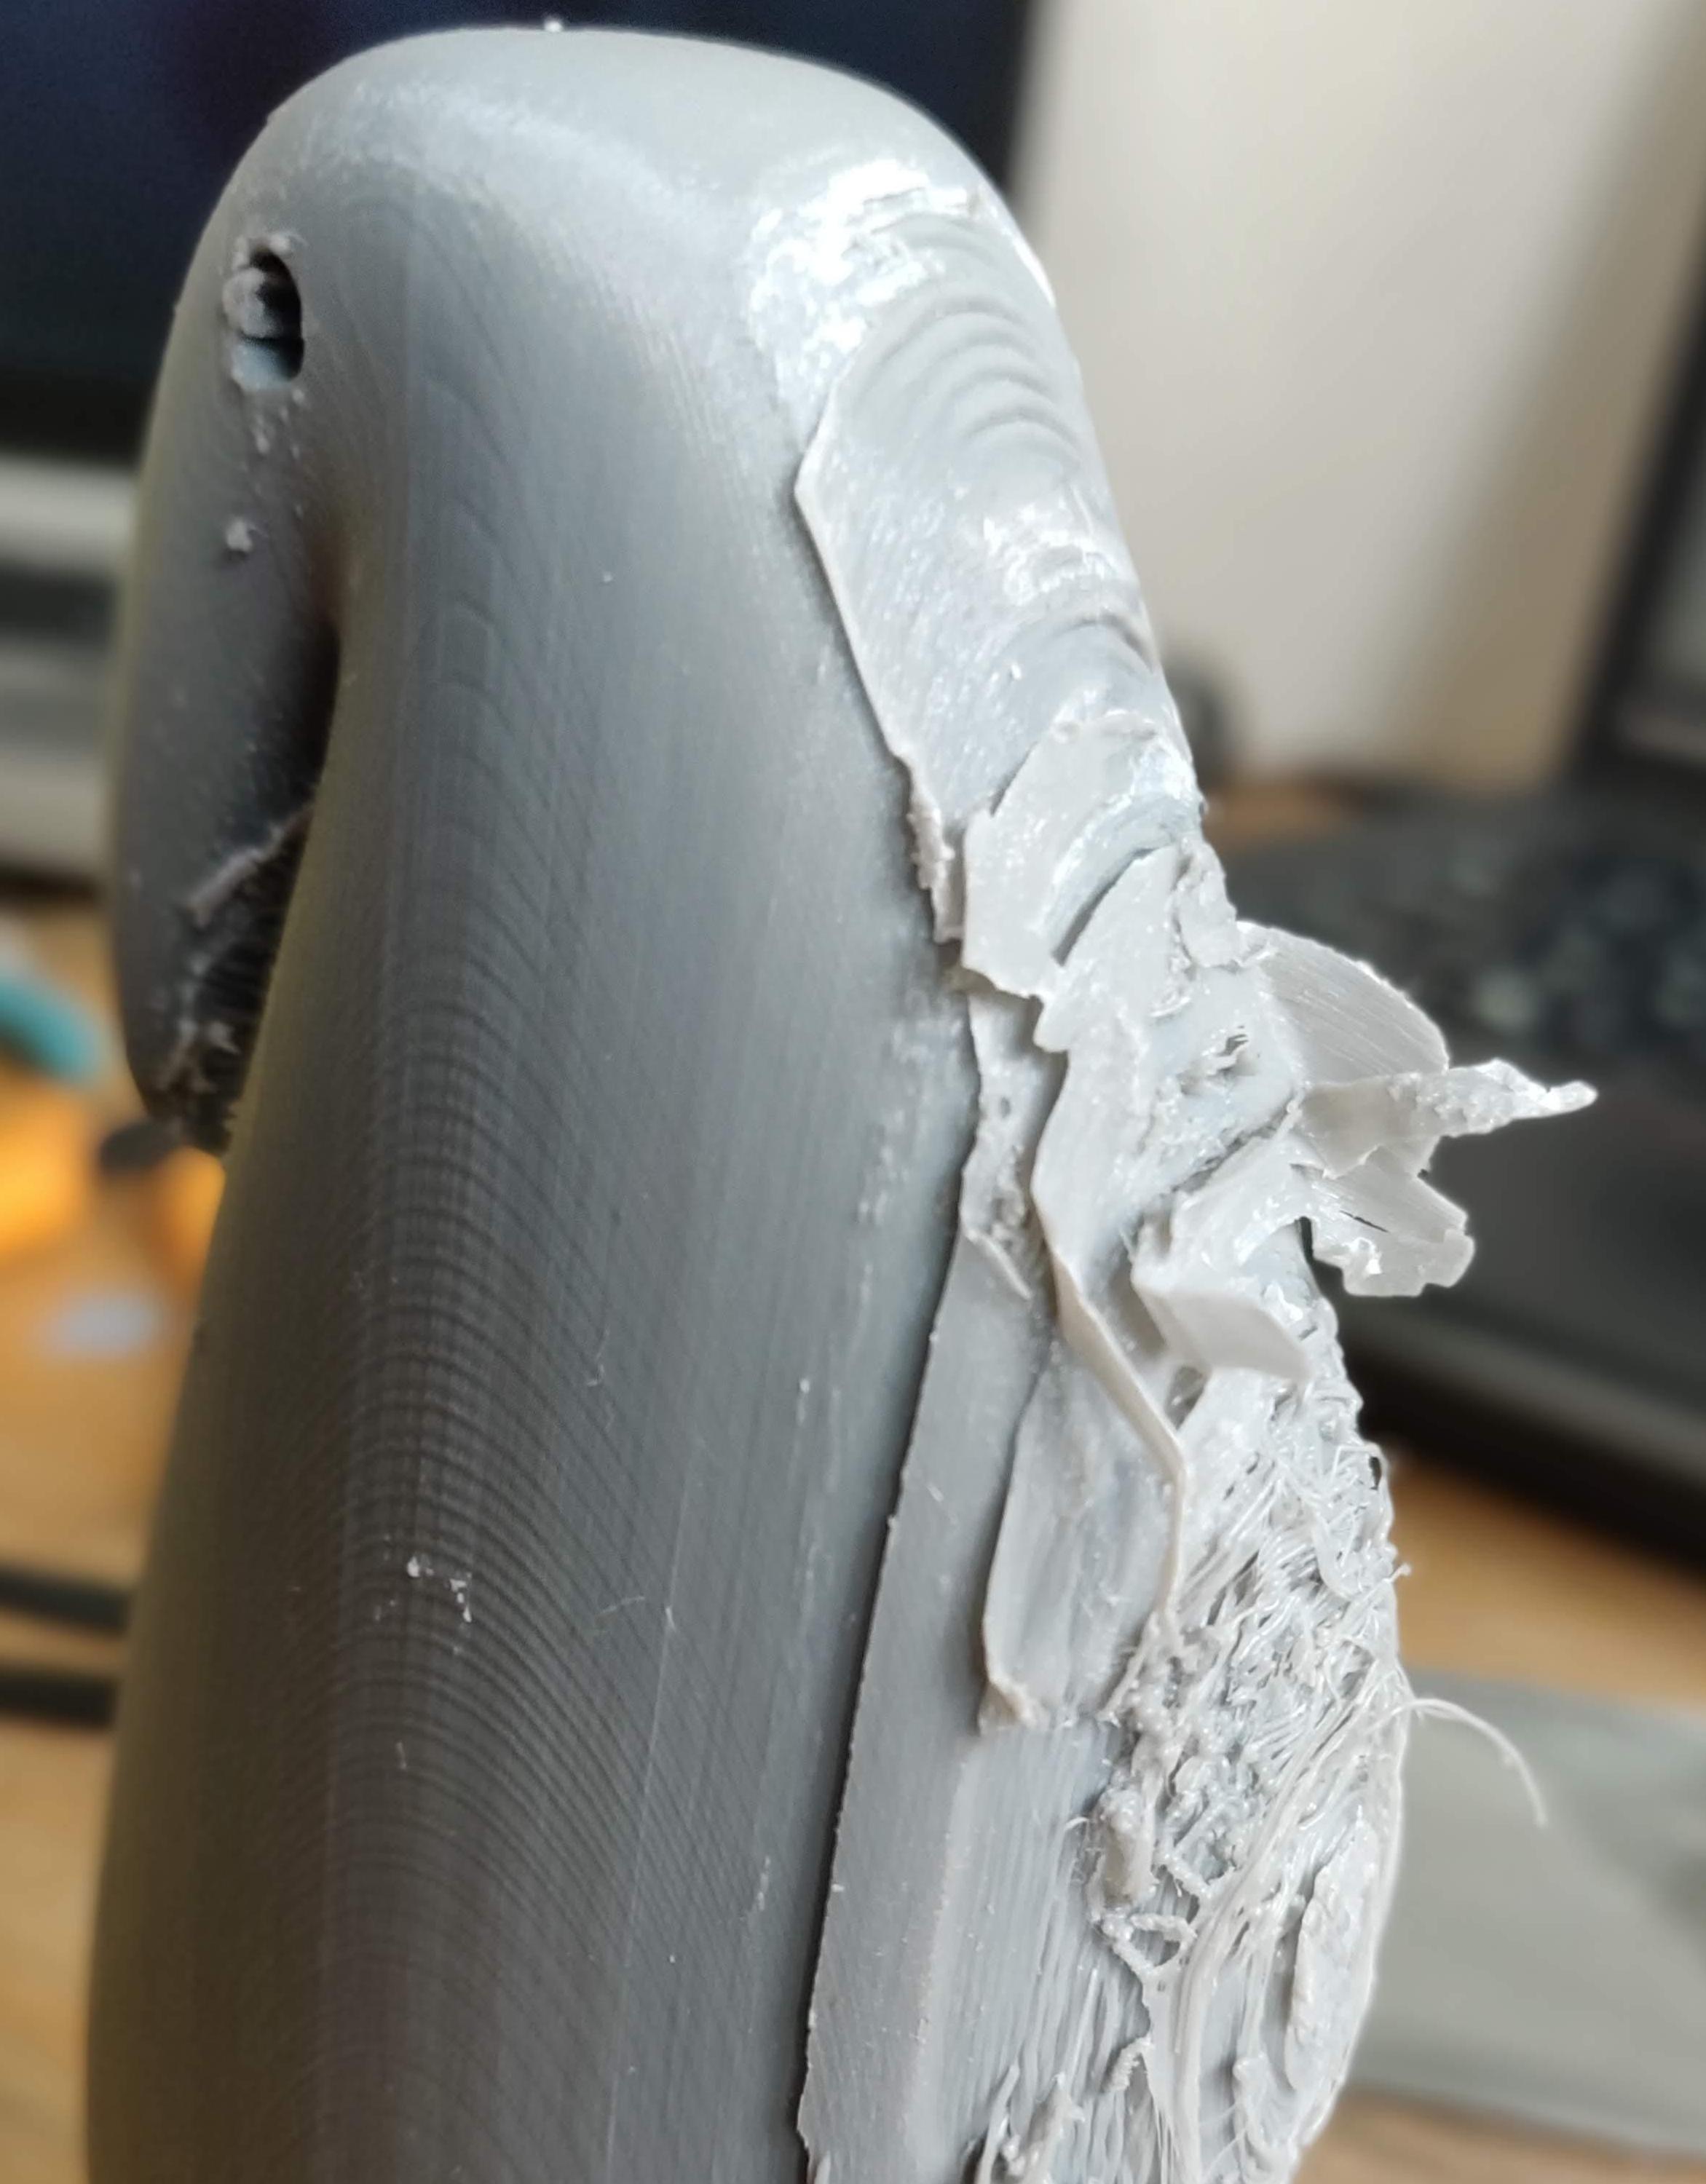 Does the surface beneath the support structure look rough?